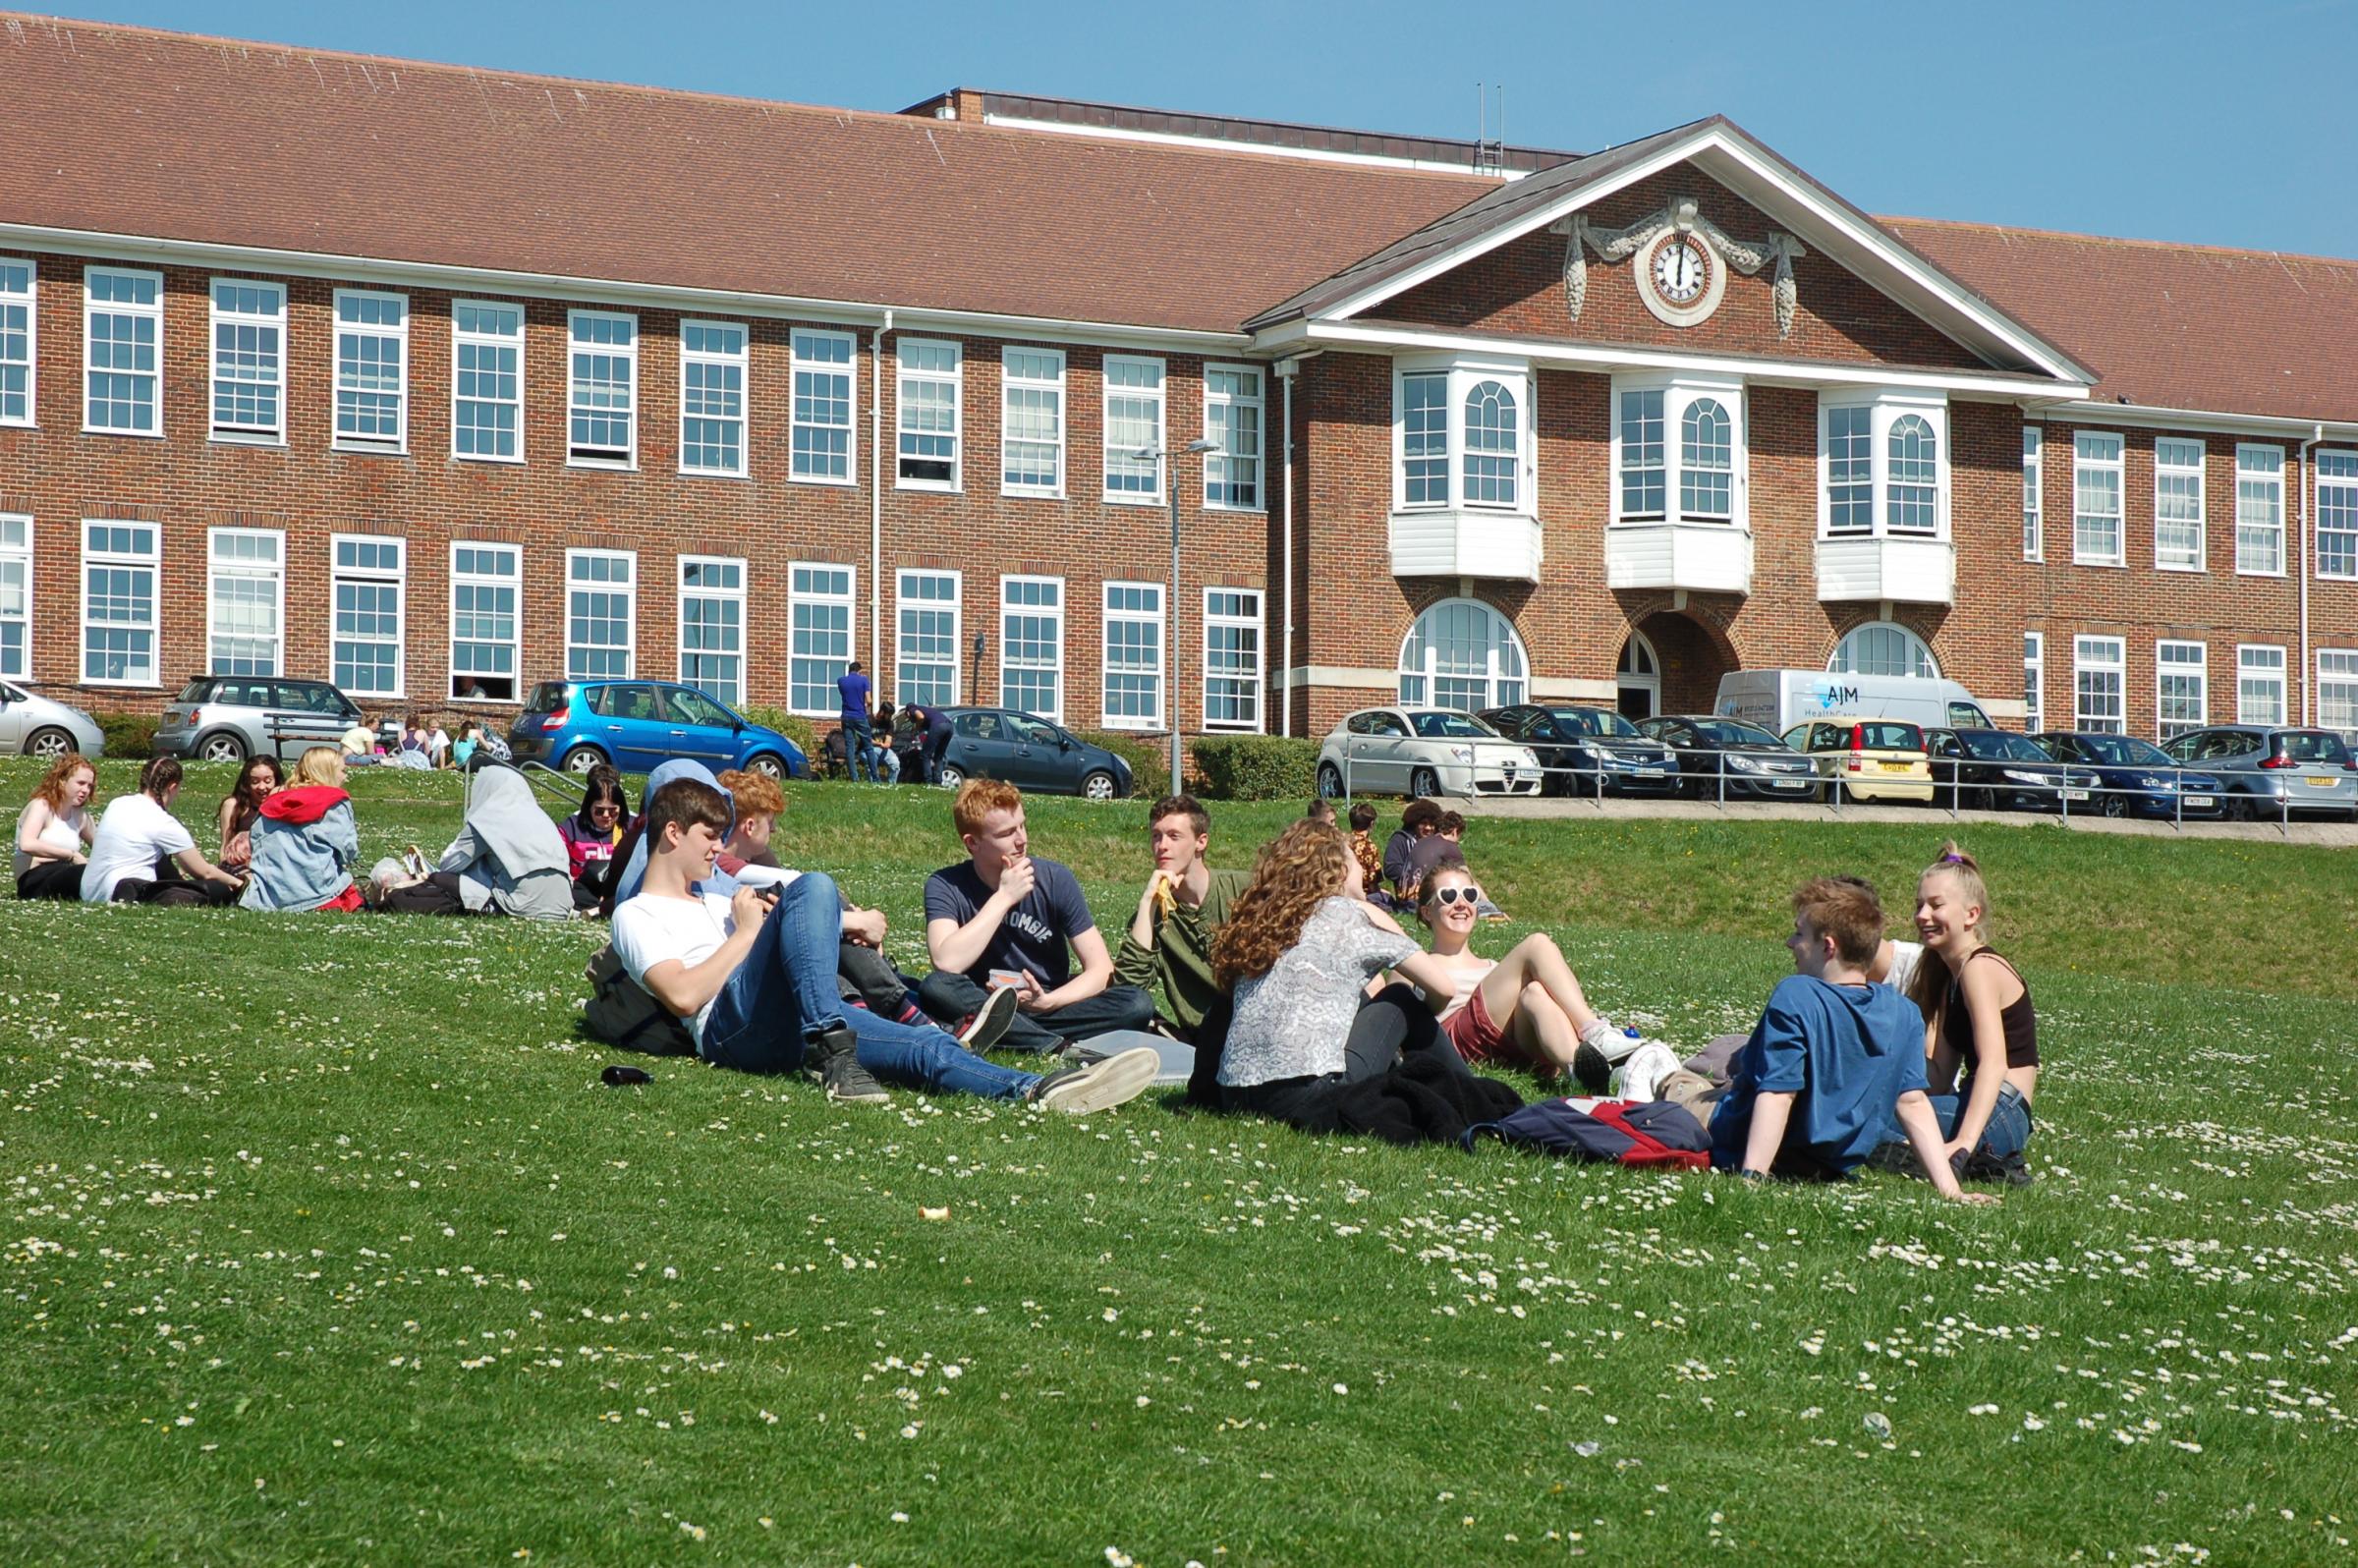 This is what Ofsted inspectors said about Varndean College